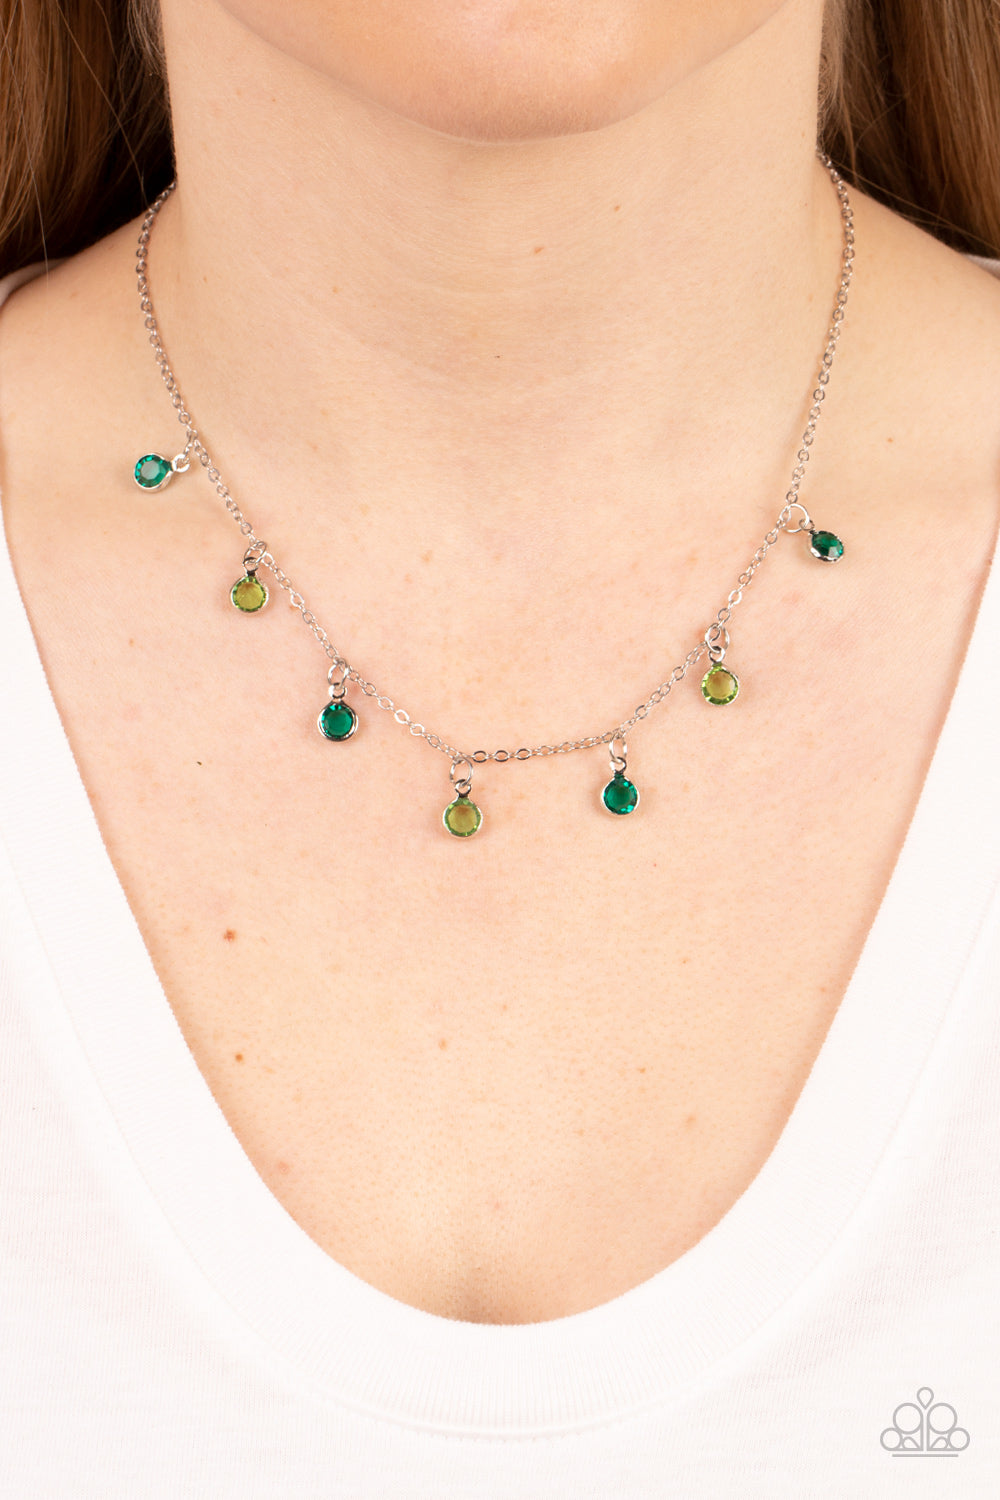 Carefree Charmer Green Necklace - Paparazzi Accessories  Encased in sleek silver fittings, a dainty collection of glassy green and light green gems twinkles along a dainty silver chain below the collar, creating a colorful fringe. Features an adjustable clasp closure.  Sold as one individual necklace. Includes one pair of matching earrings.